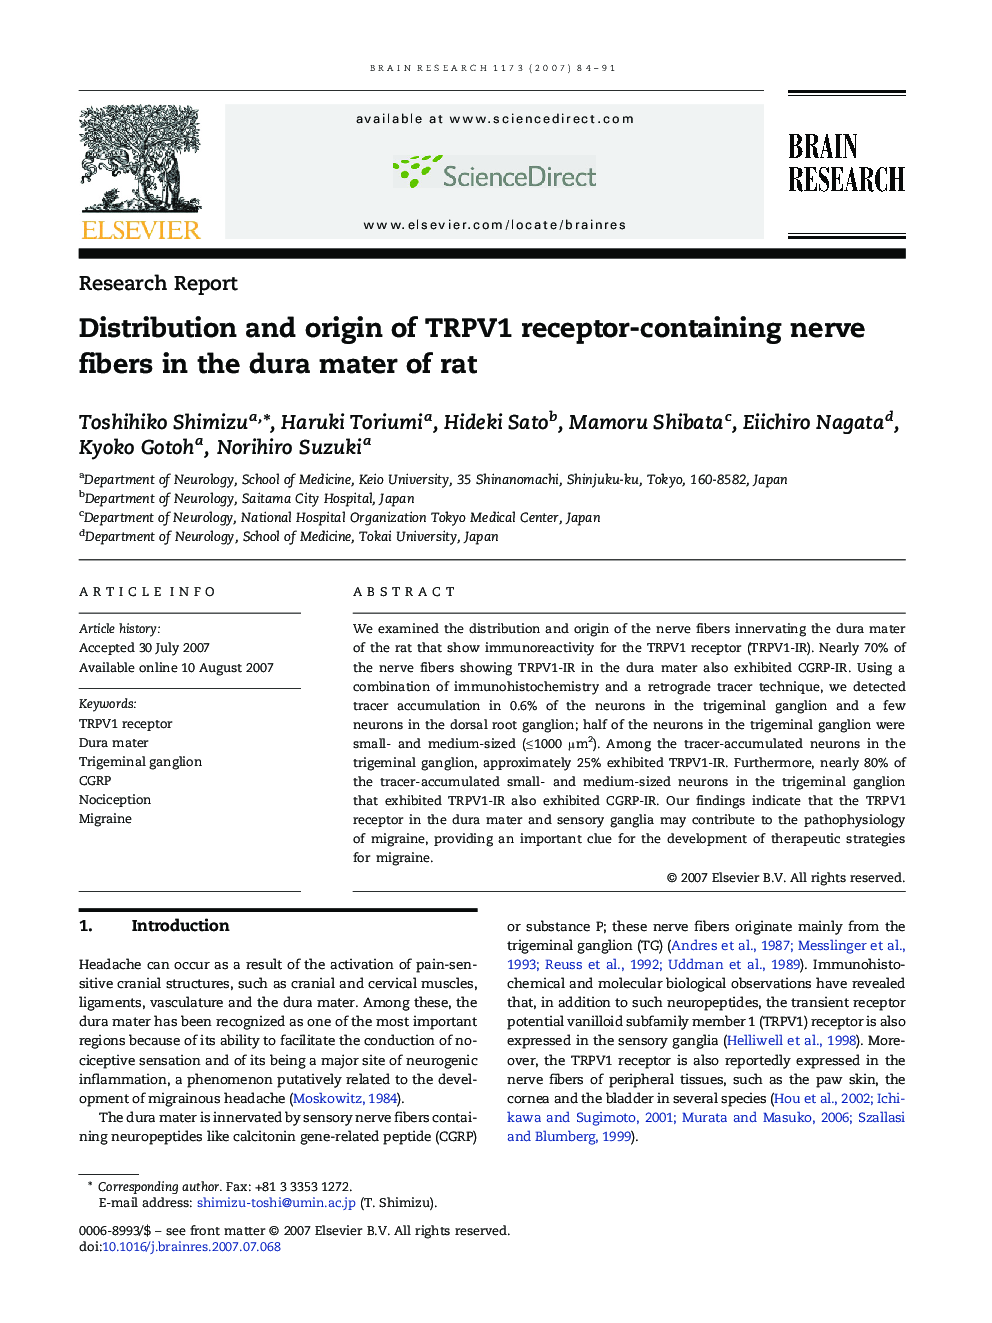 Distribution and origin of TRPV1 receptor-containing nerve fibers in the dura mater of rat